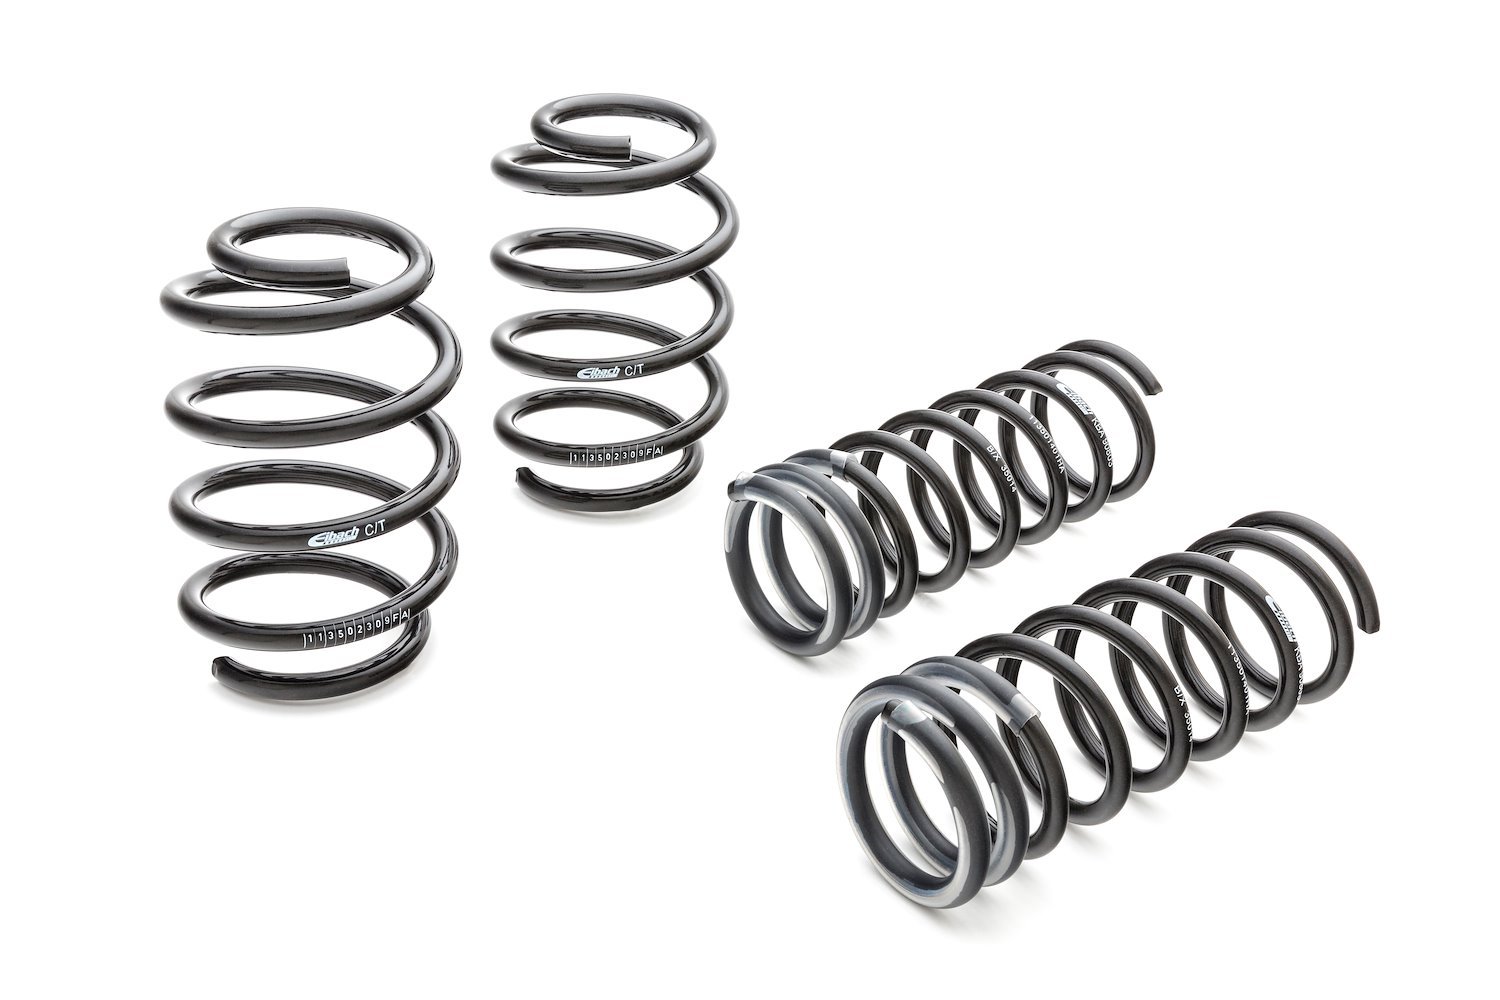 3510.140 Pro-Kit Lowering Springs 1979-1993 Mustang V8 Coupe - 1.200 in. Front/1 in. Rear Drop